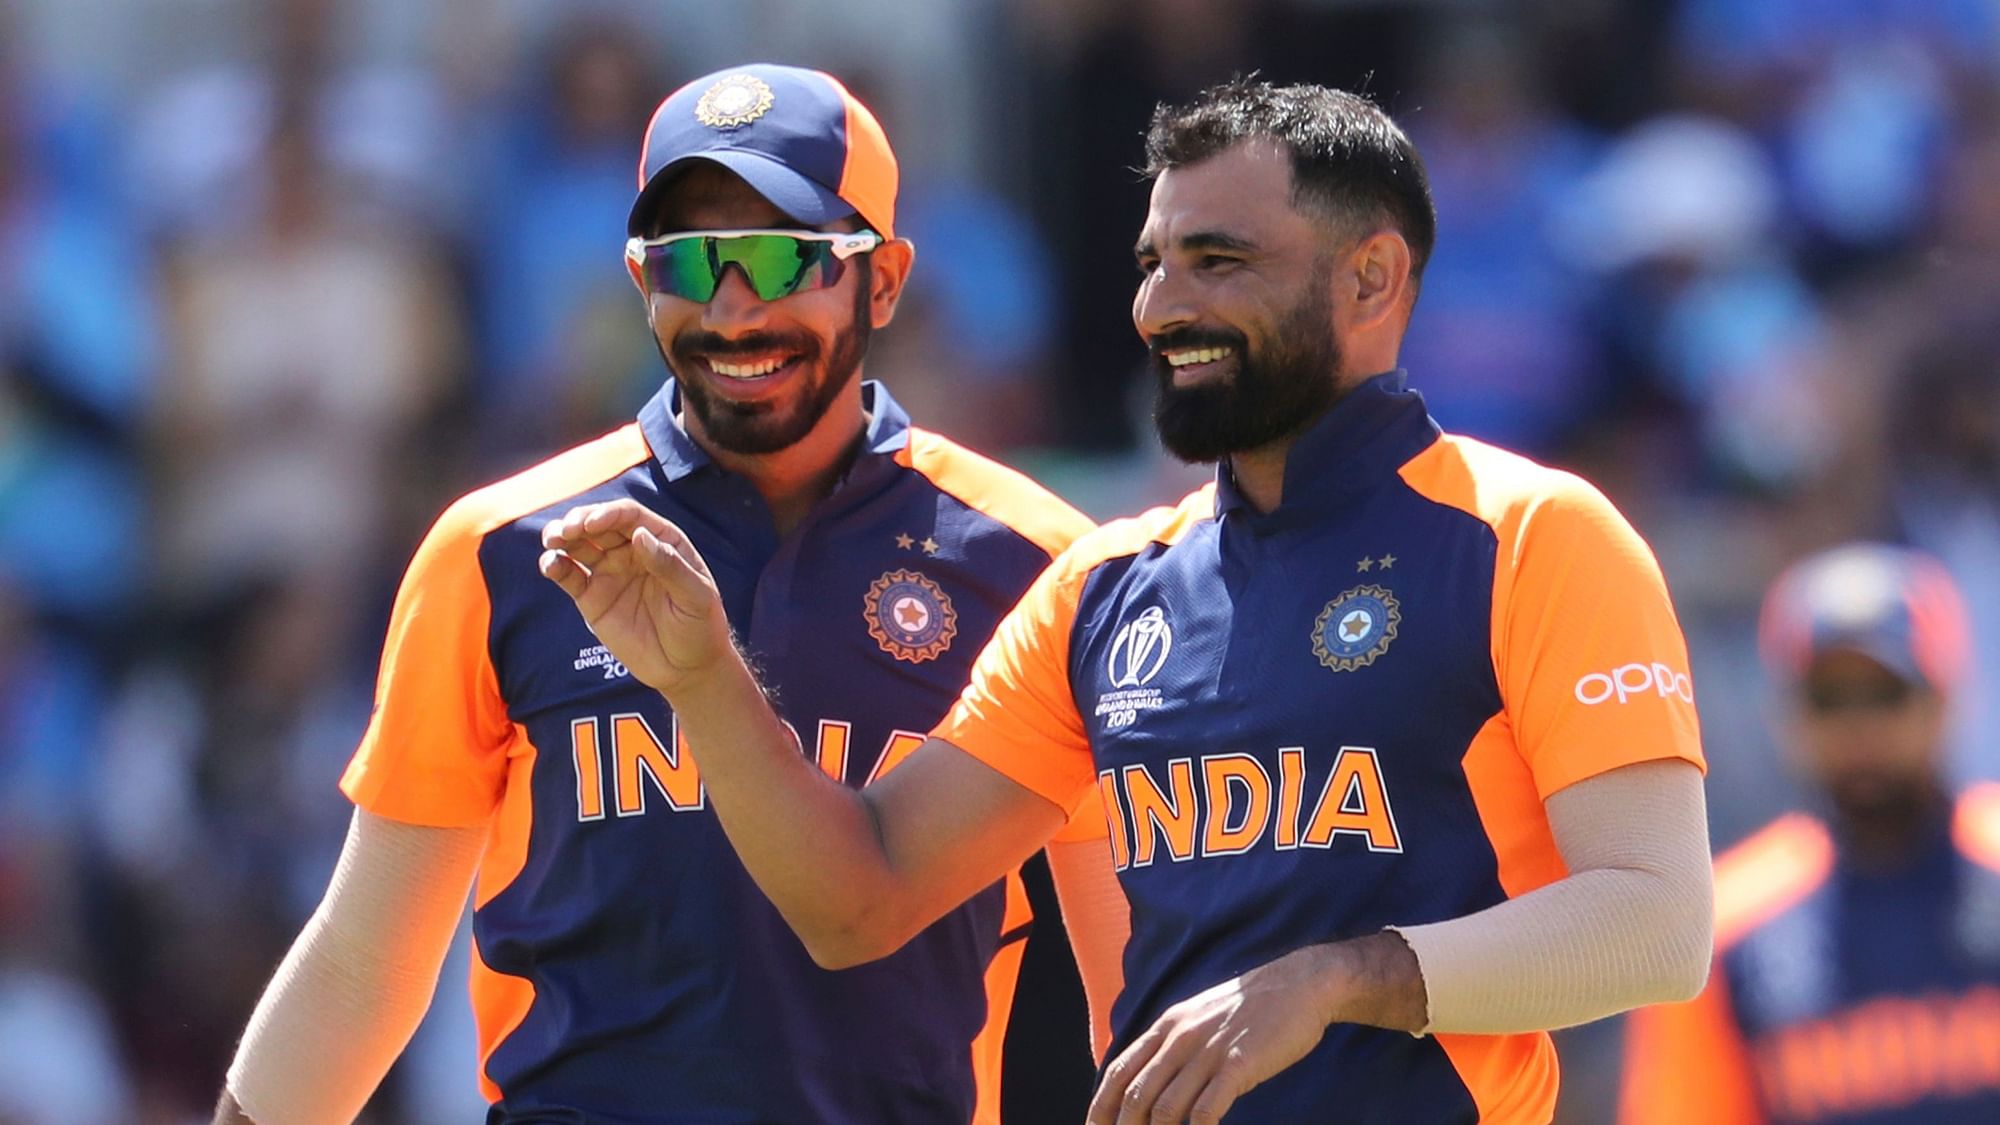 Mohammed Shami picked up a fifer as England were restricted to 337/7 by India in Birmingham.